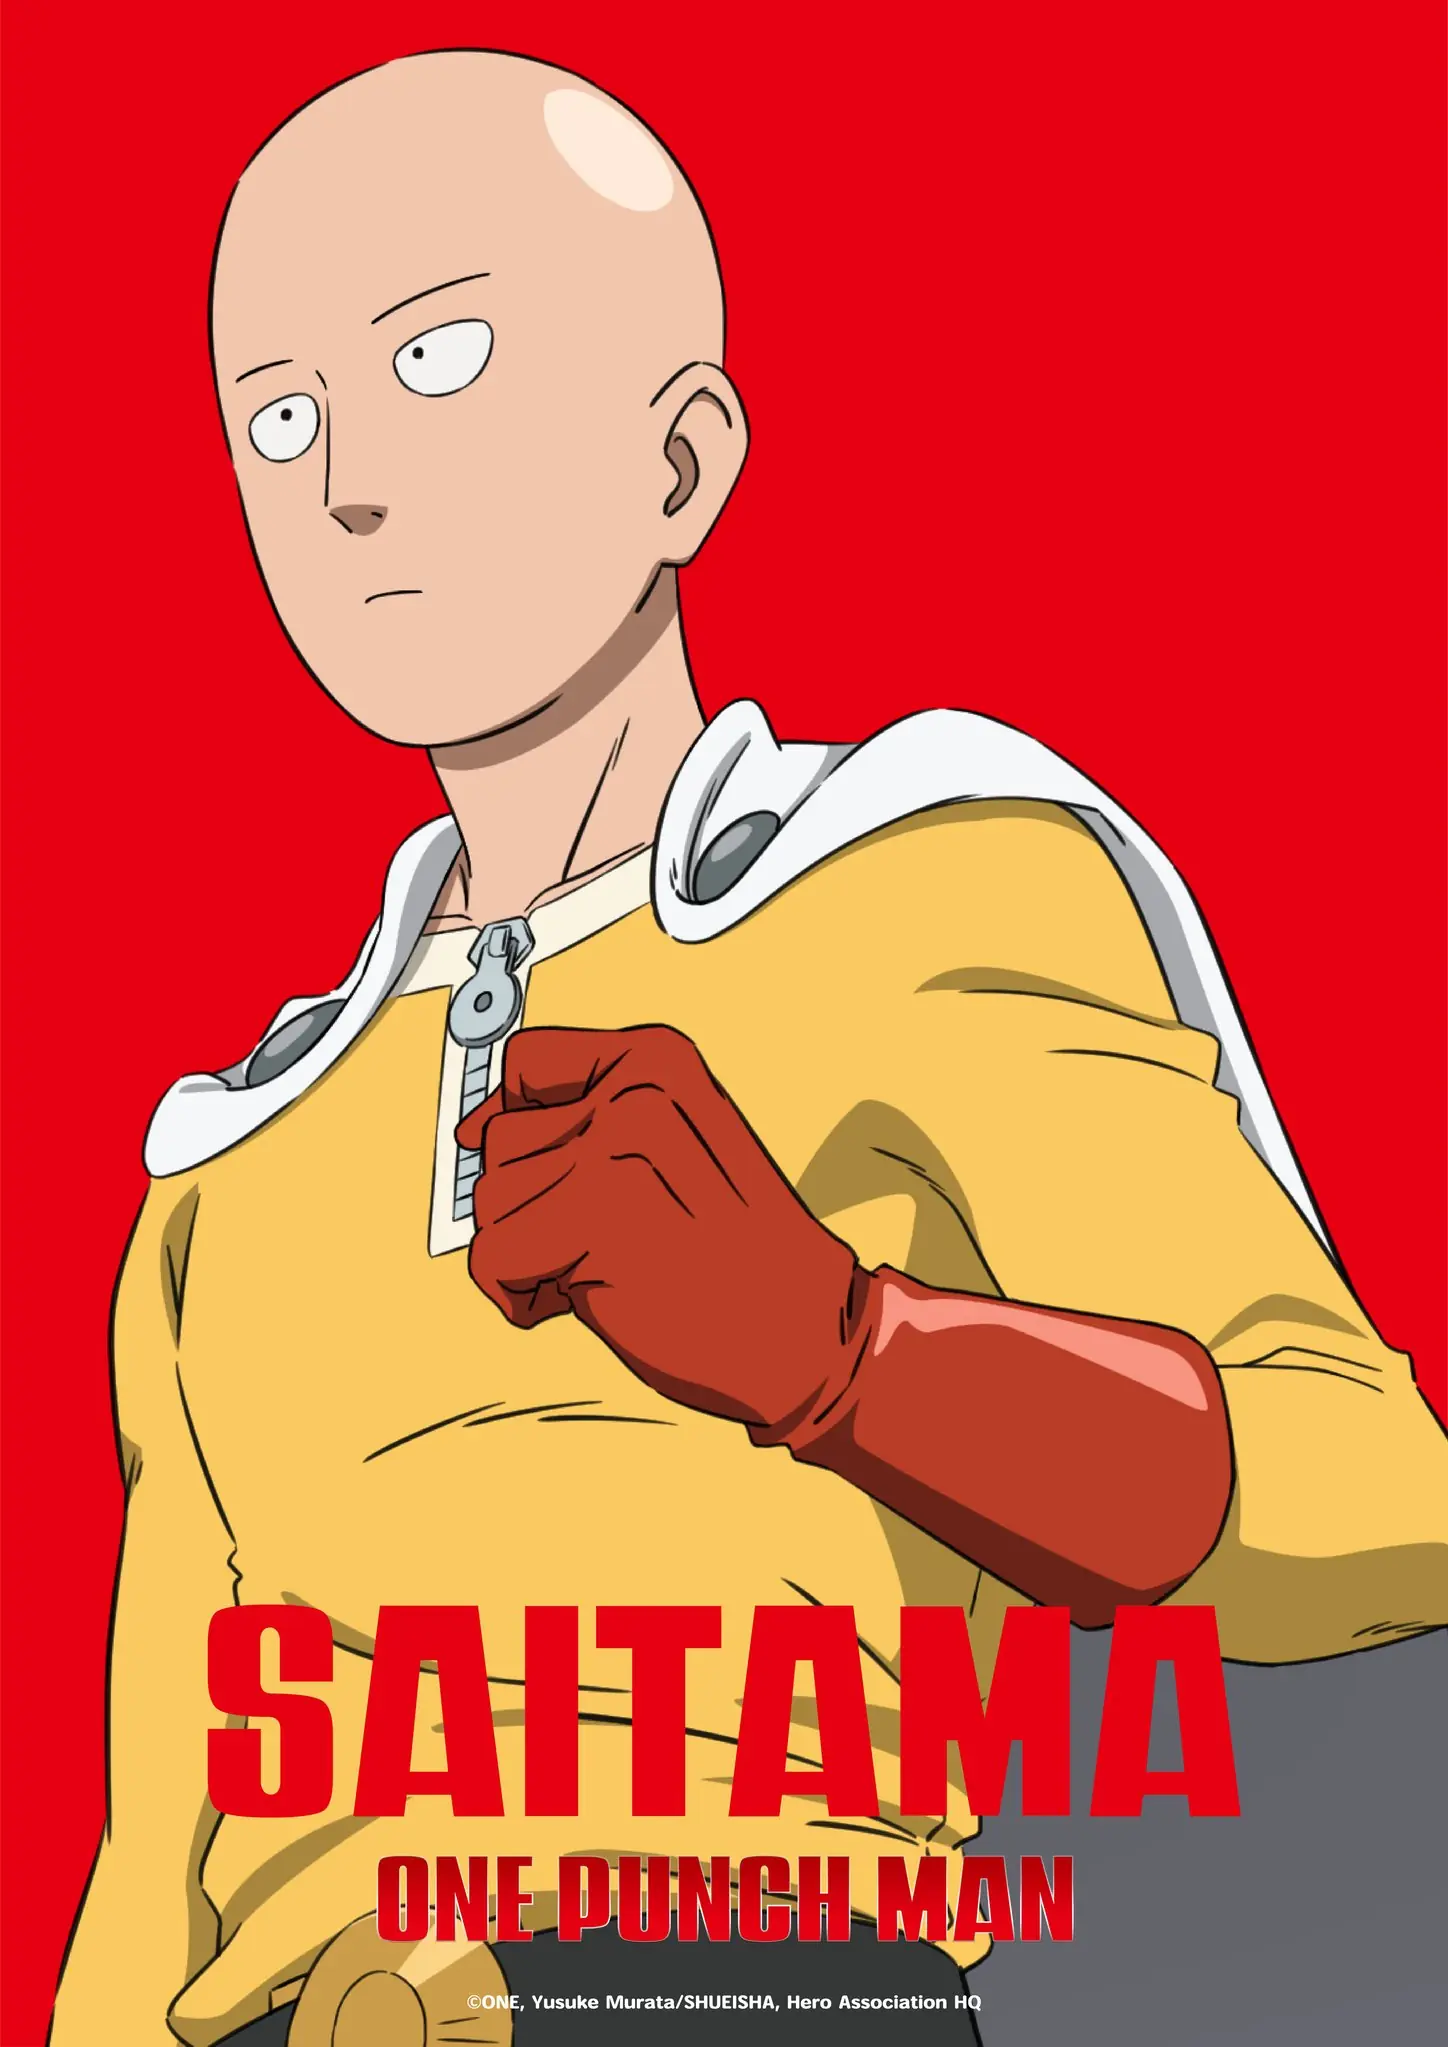 One Punch Man Season 3 will be animated by JCStaff 1